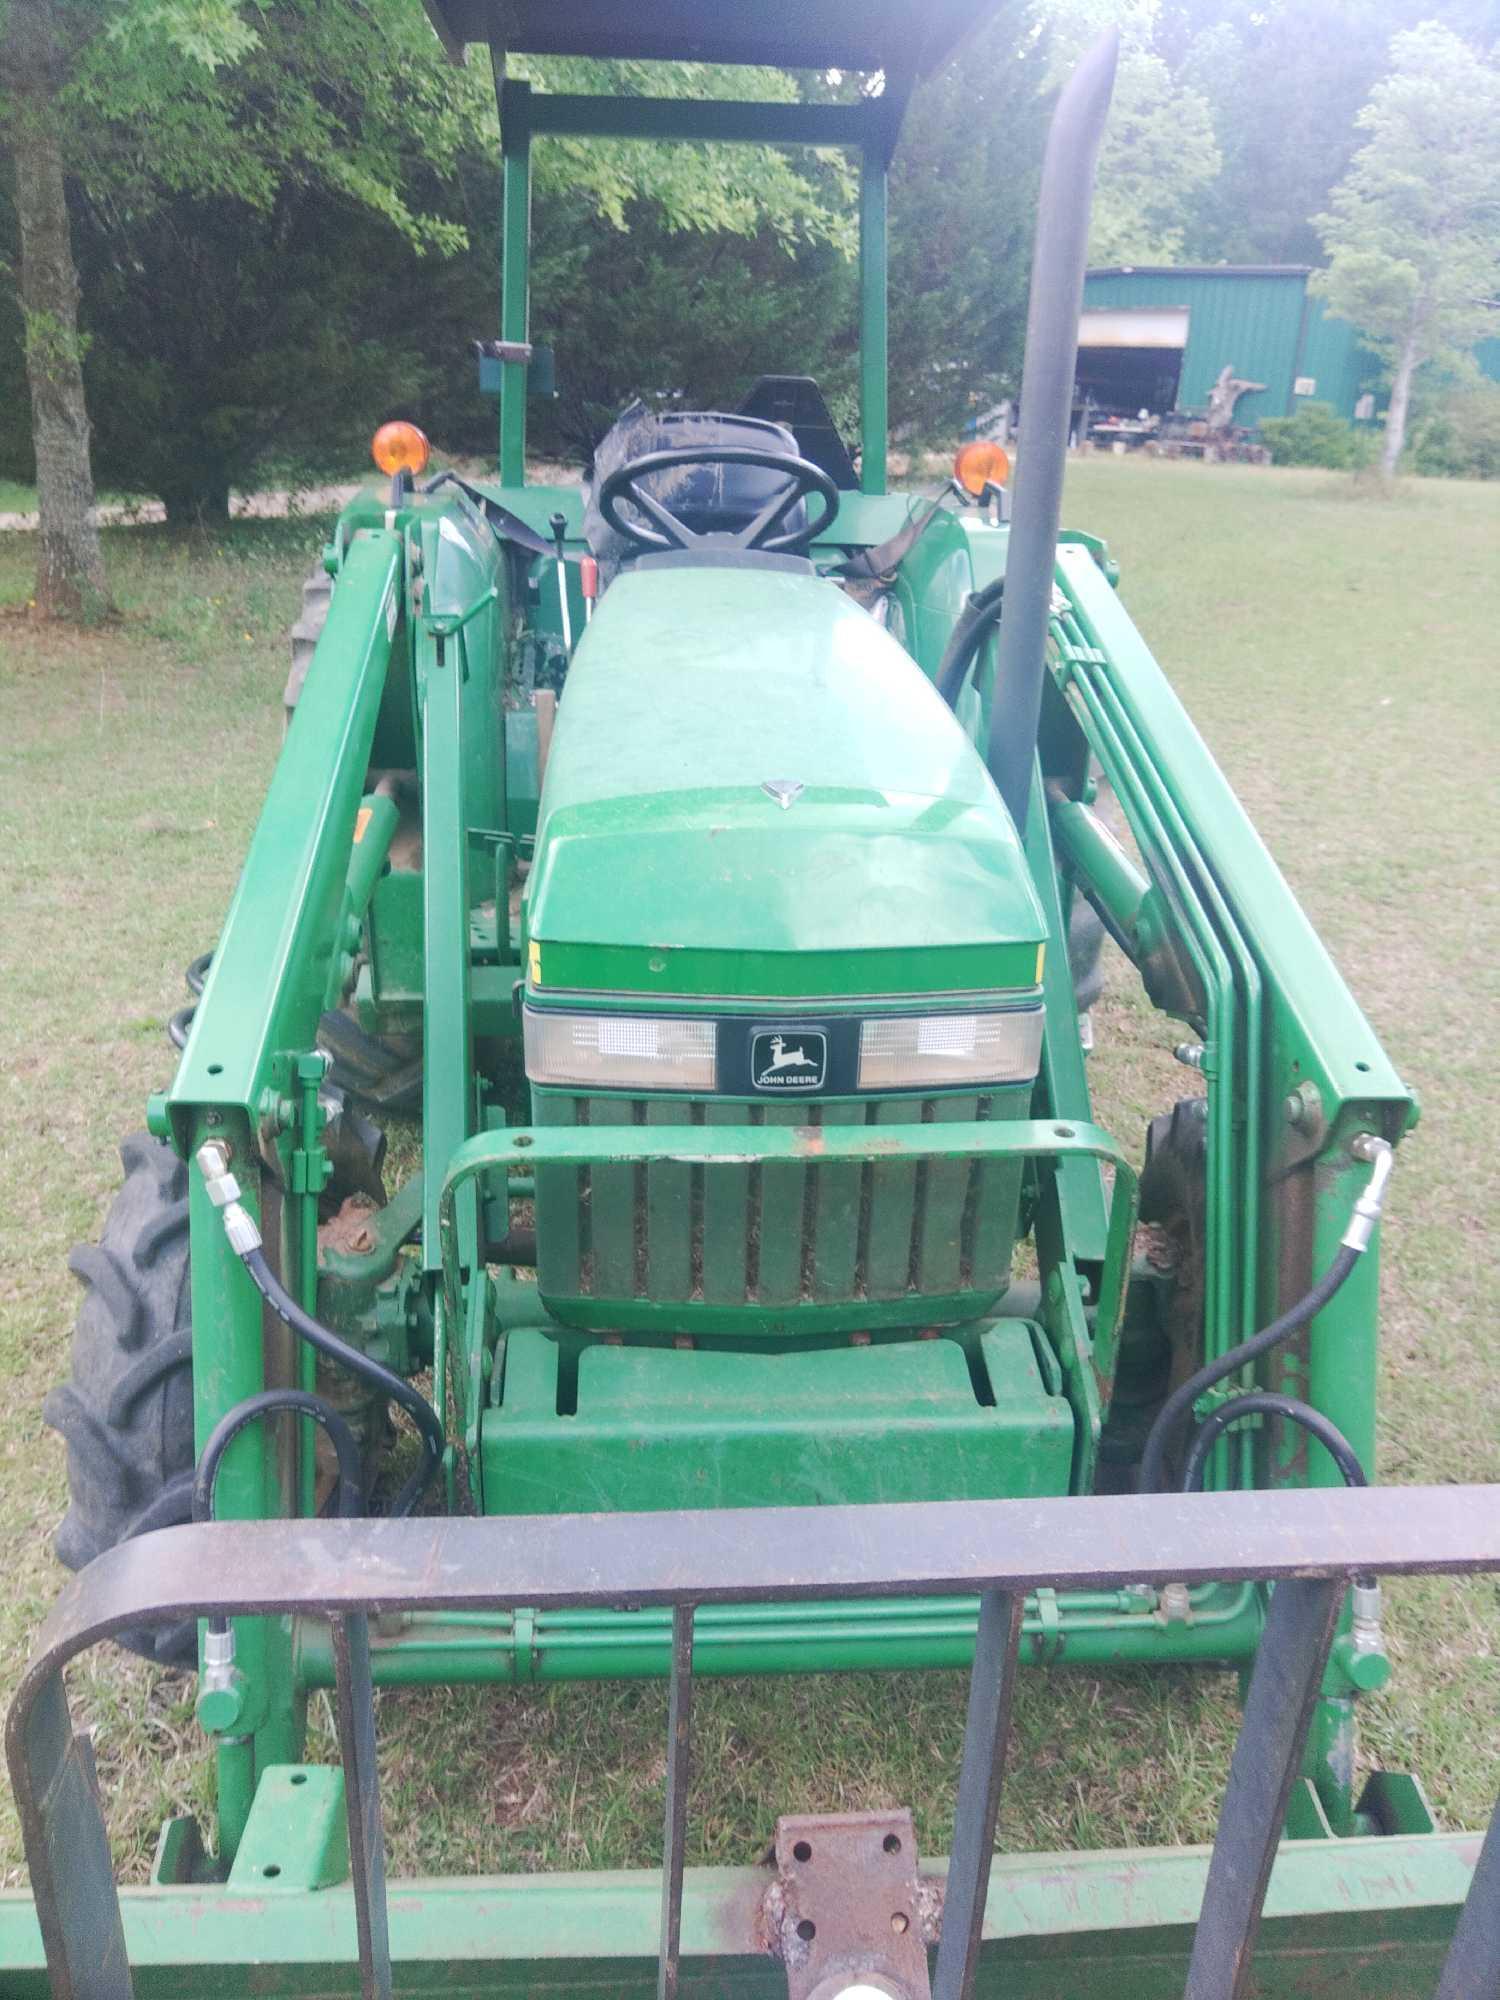 John Deere 1070 4wd tractor with loader